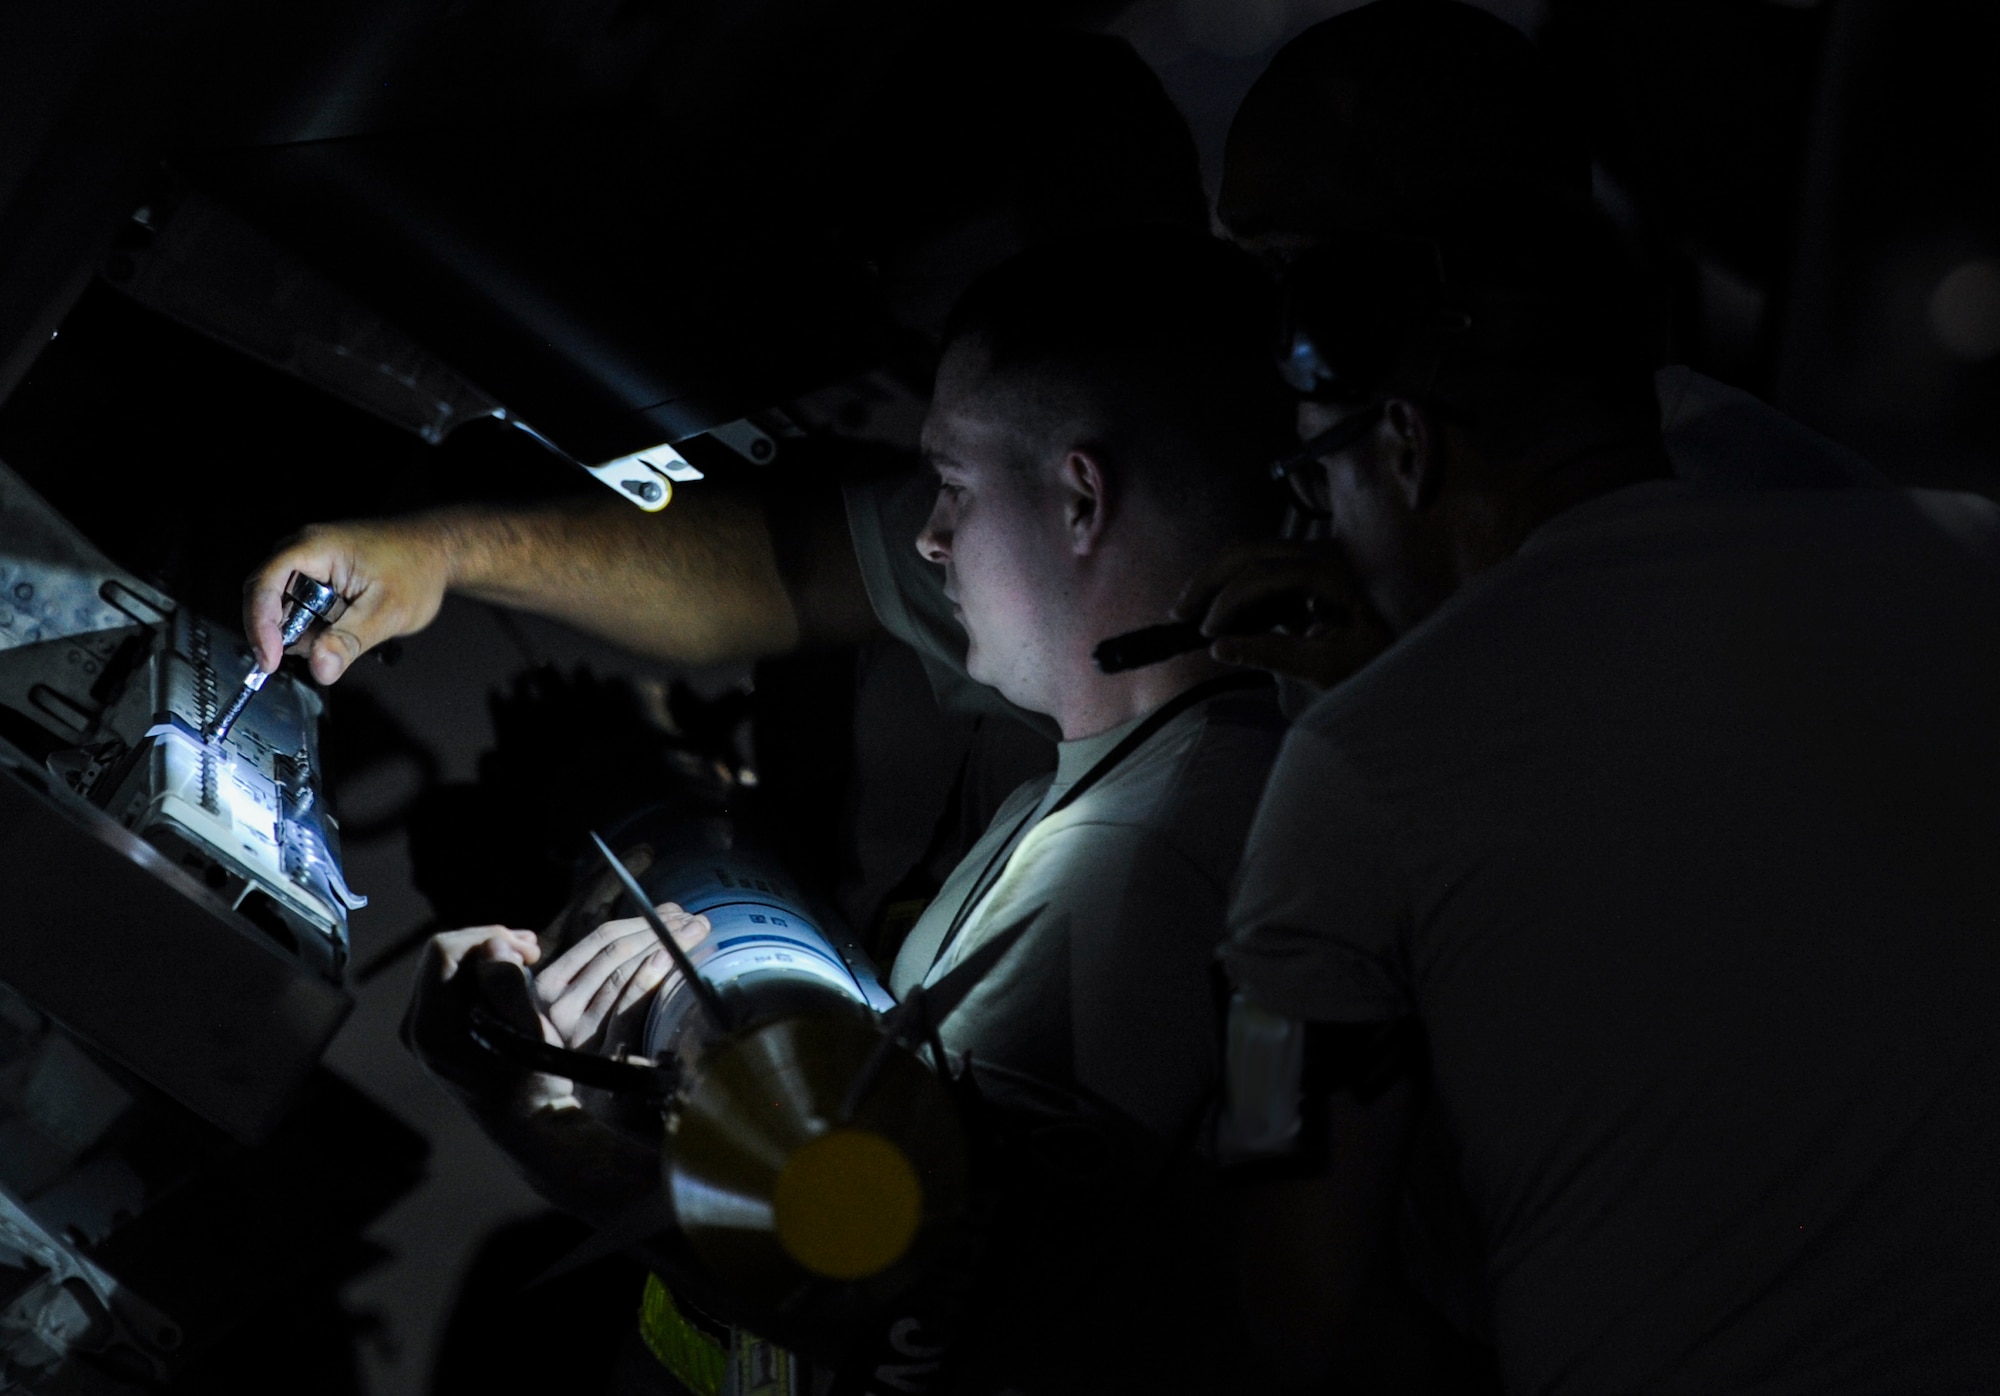 Maintainers, assigned to the 27th Fighter Squadron, Joint Base Langley-Eustis, Va., load an F-22A Raptor prior to take-off during Red Flag 16-3 at Nellis Air Force Base, Nev., July 25, 2016. Red Flag is a realistic combat training exercise involving the air, space and cyber forces of the U.S. (U.S. Air Force photo by Airman 1st Class Kevin Tanenbaum/Released)